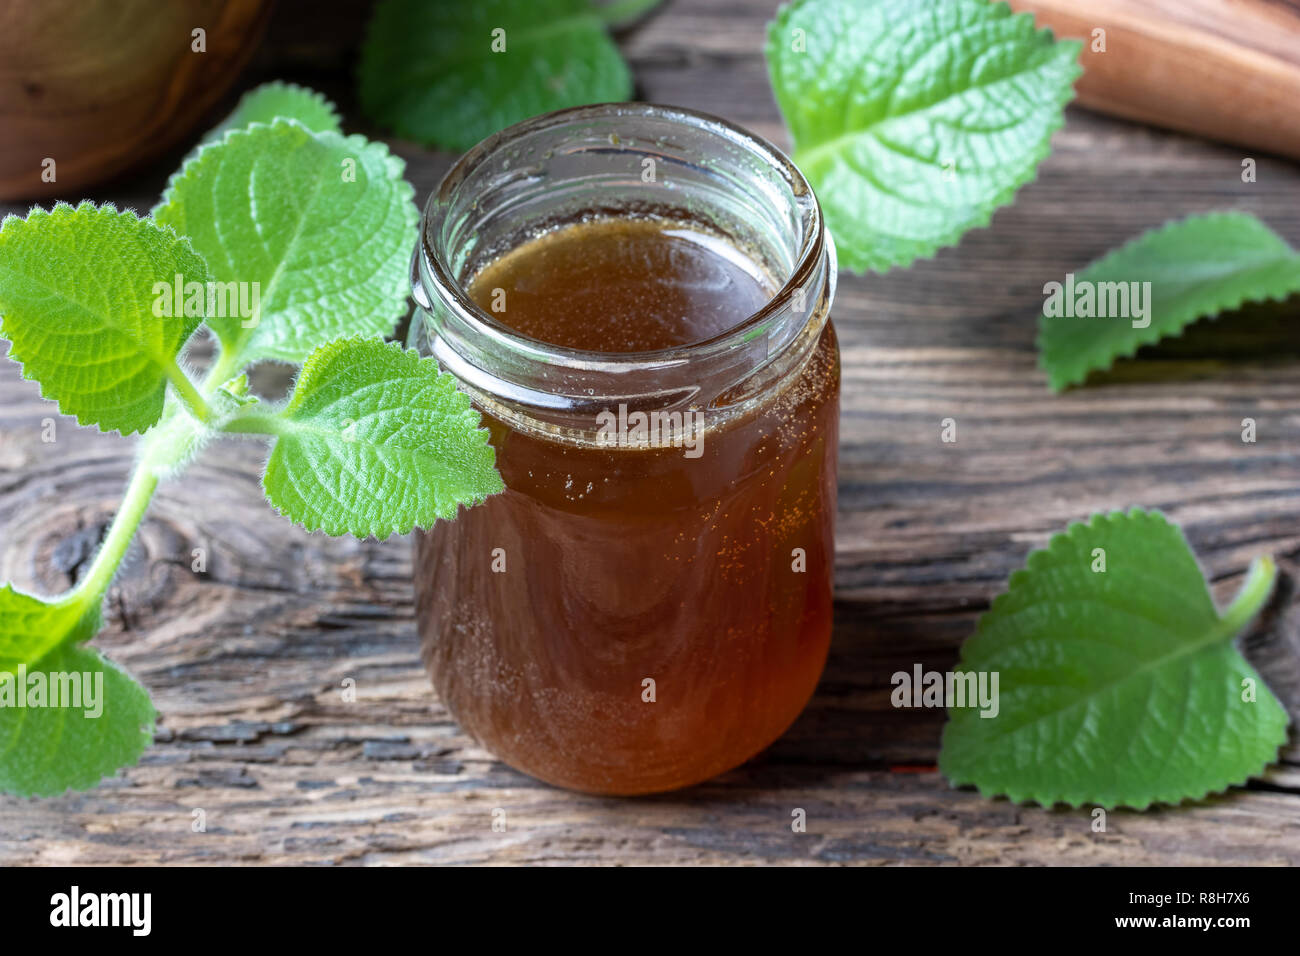 Silver spurflower syrup against common cold with fresh Plectranthus argentatus plant Stock Photo